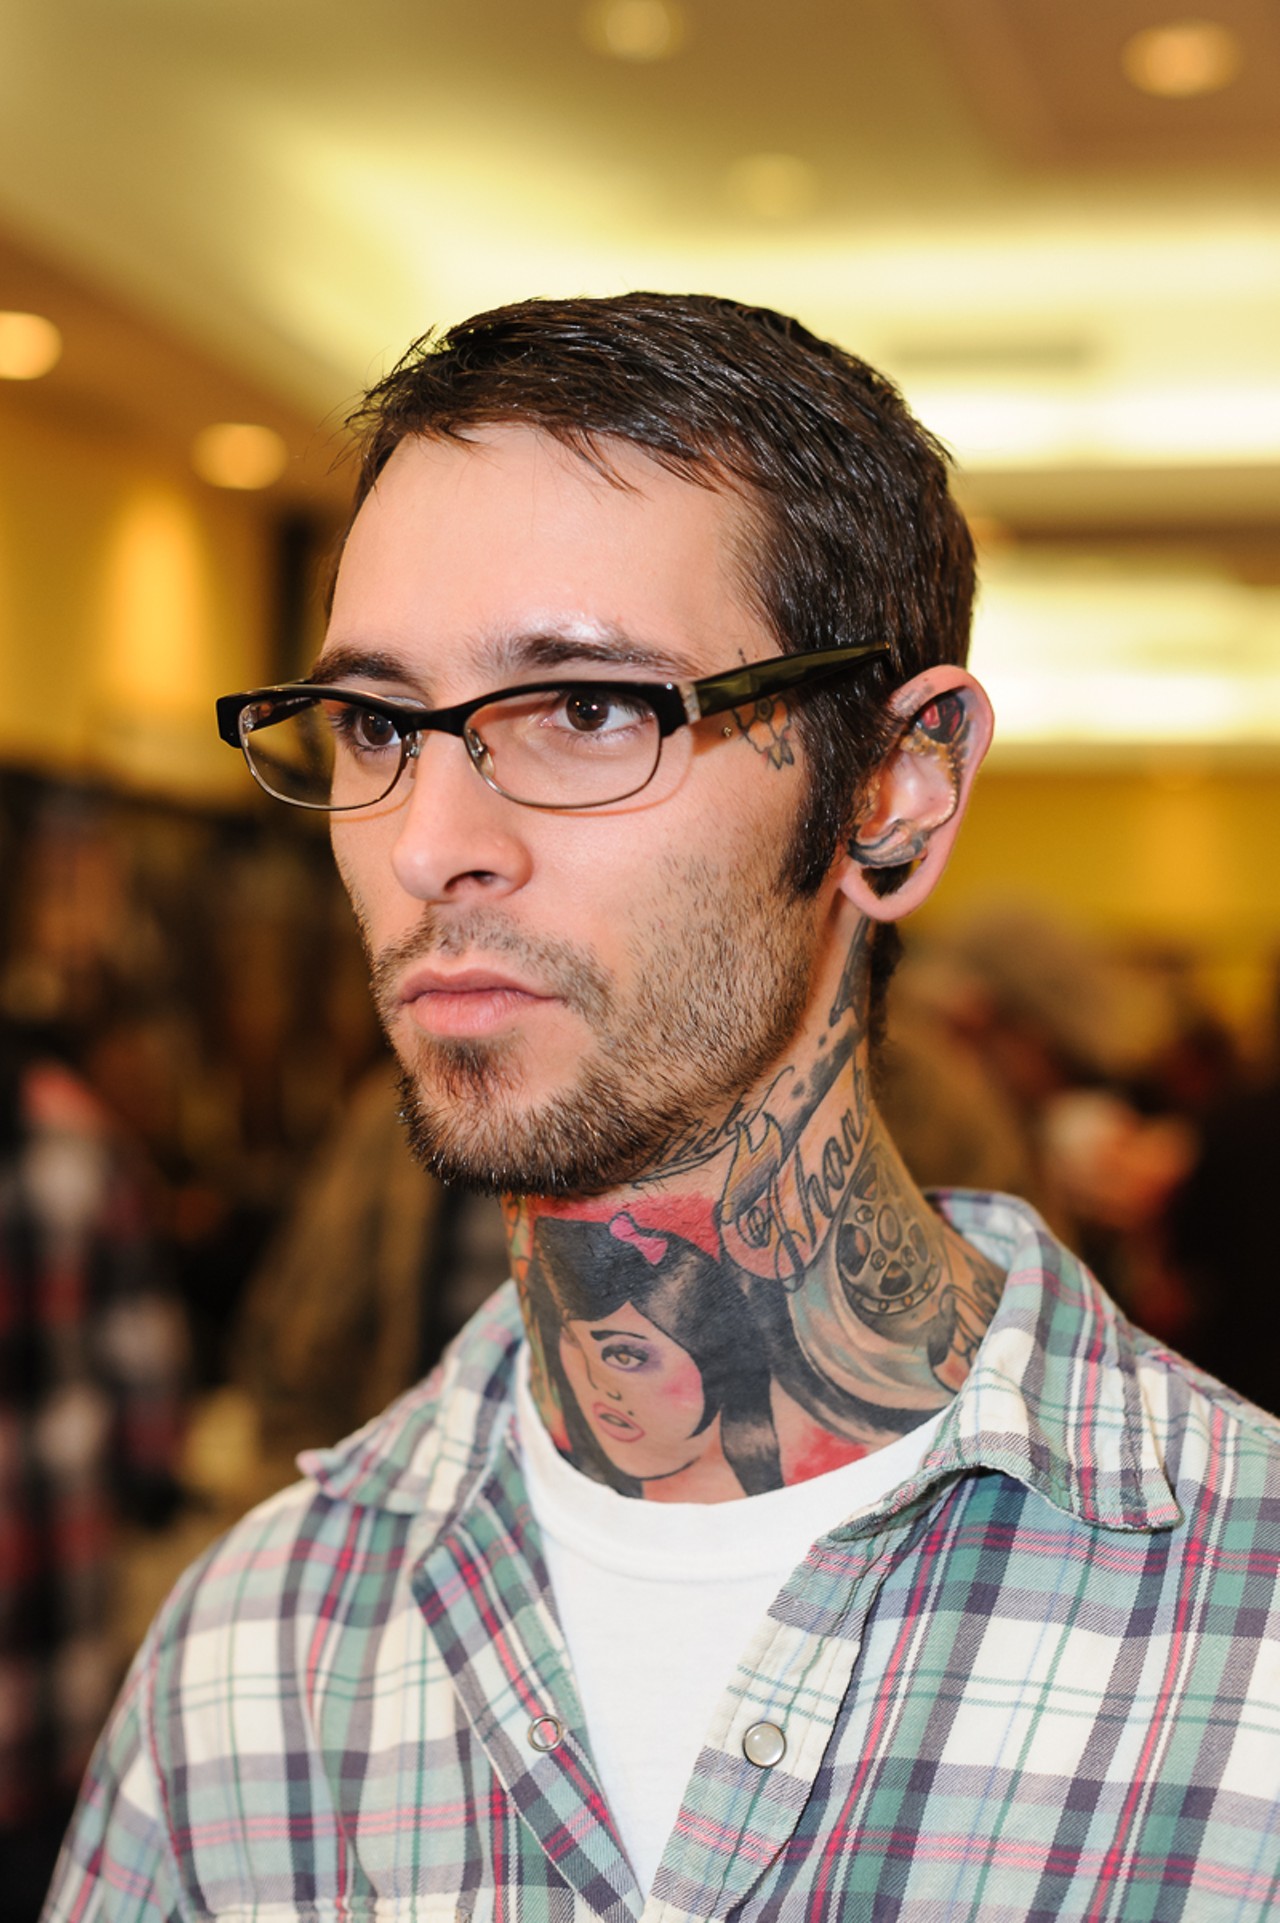 Face Tats Explained at Old School Tattoo Expo